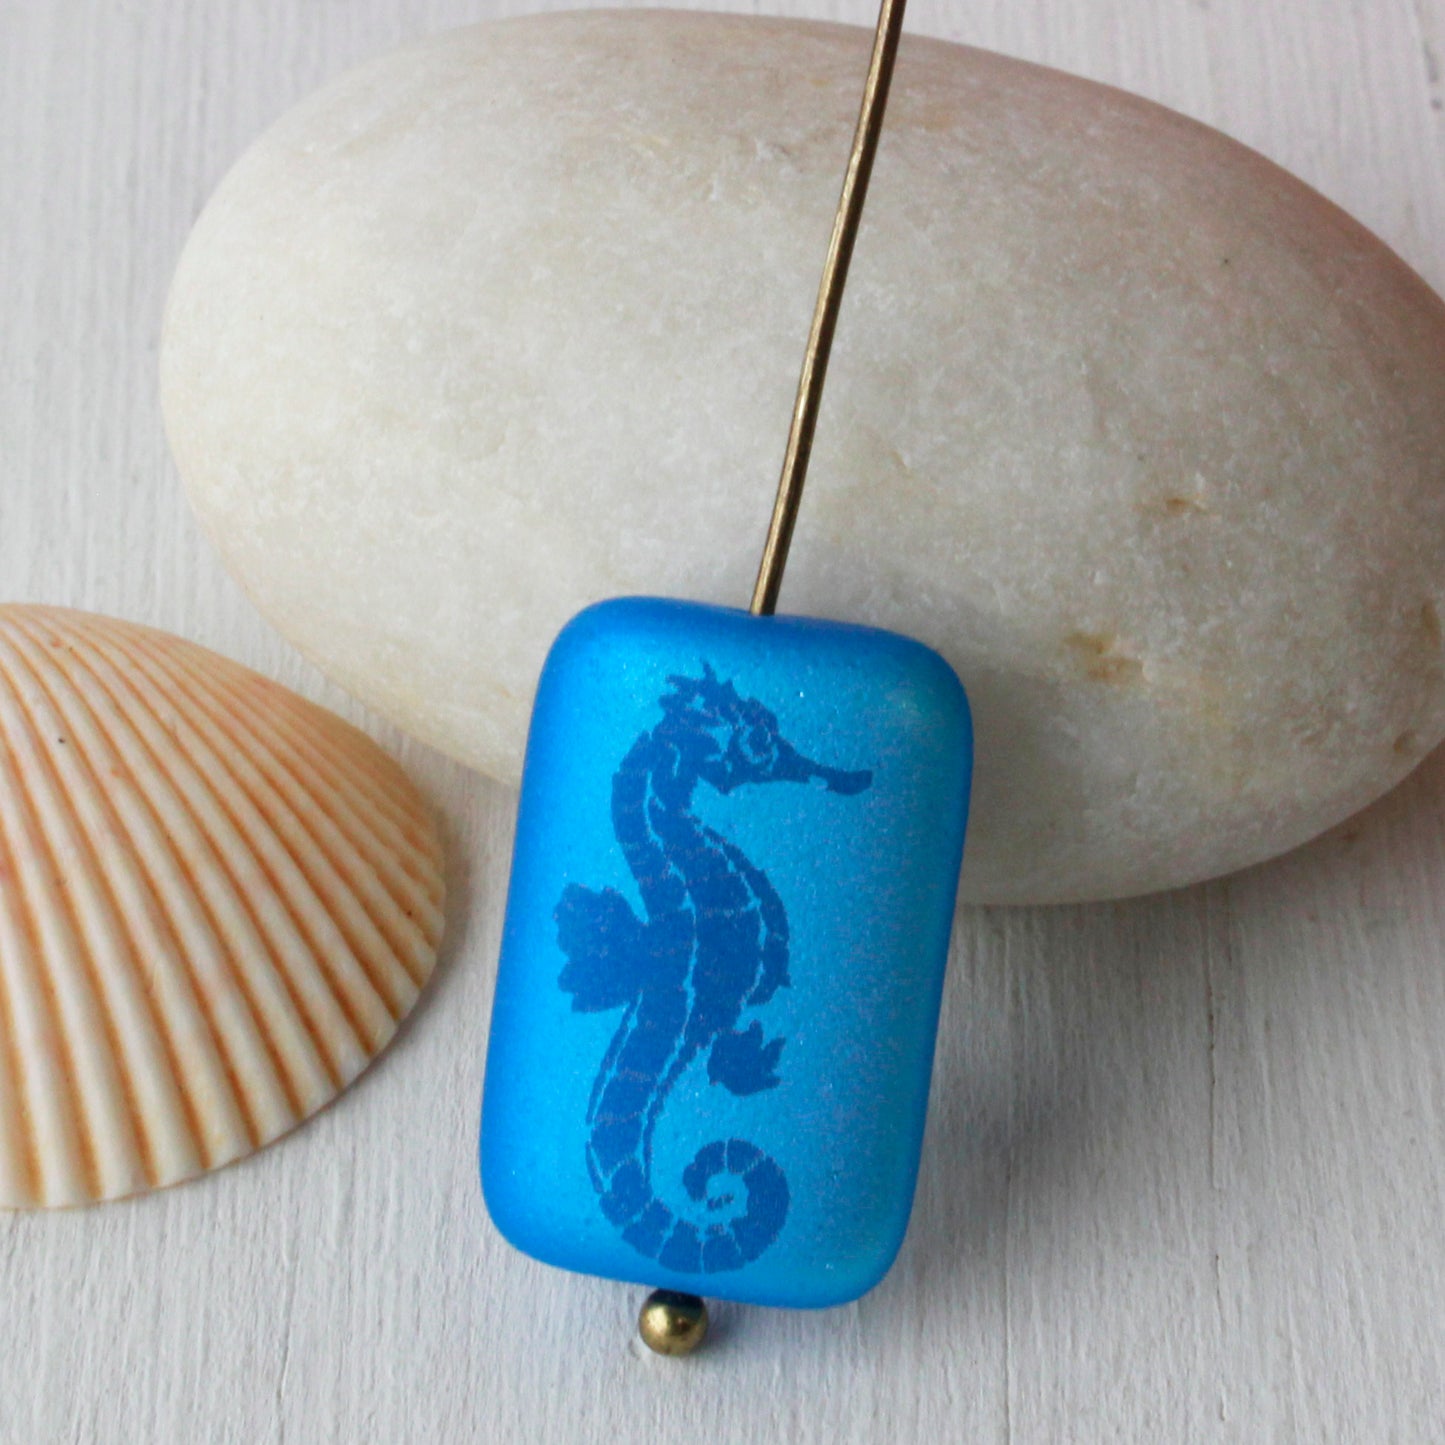 Seahorse Beads - 19mm Rectangle Beads - 6 Beads